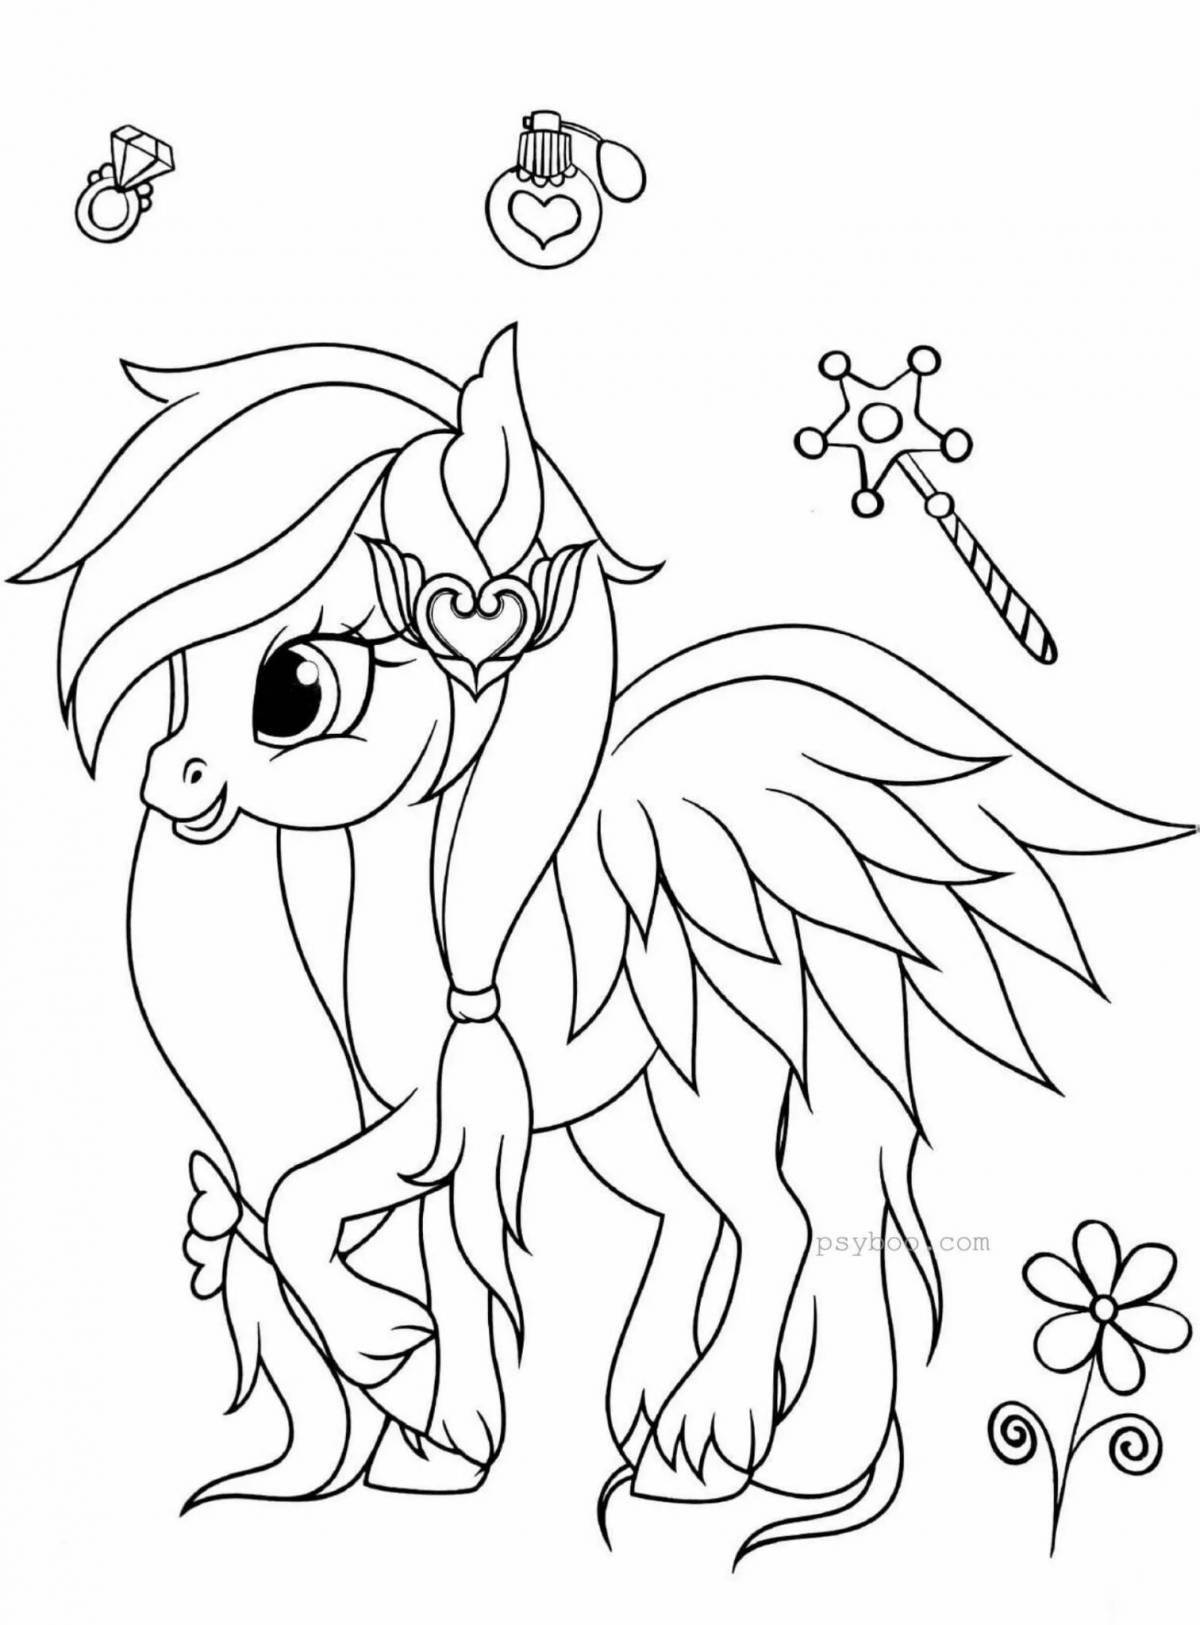 Shine pony coloring book